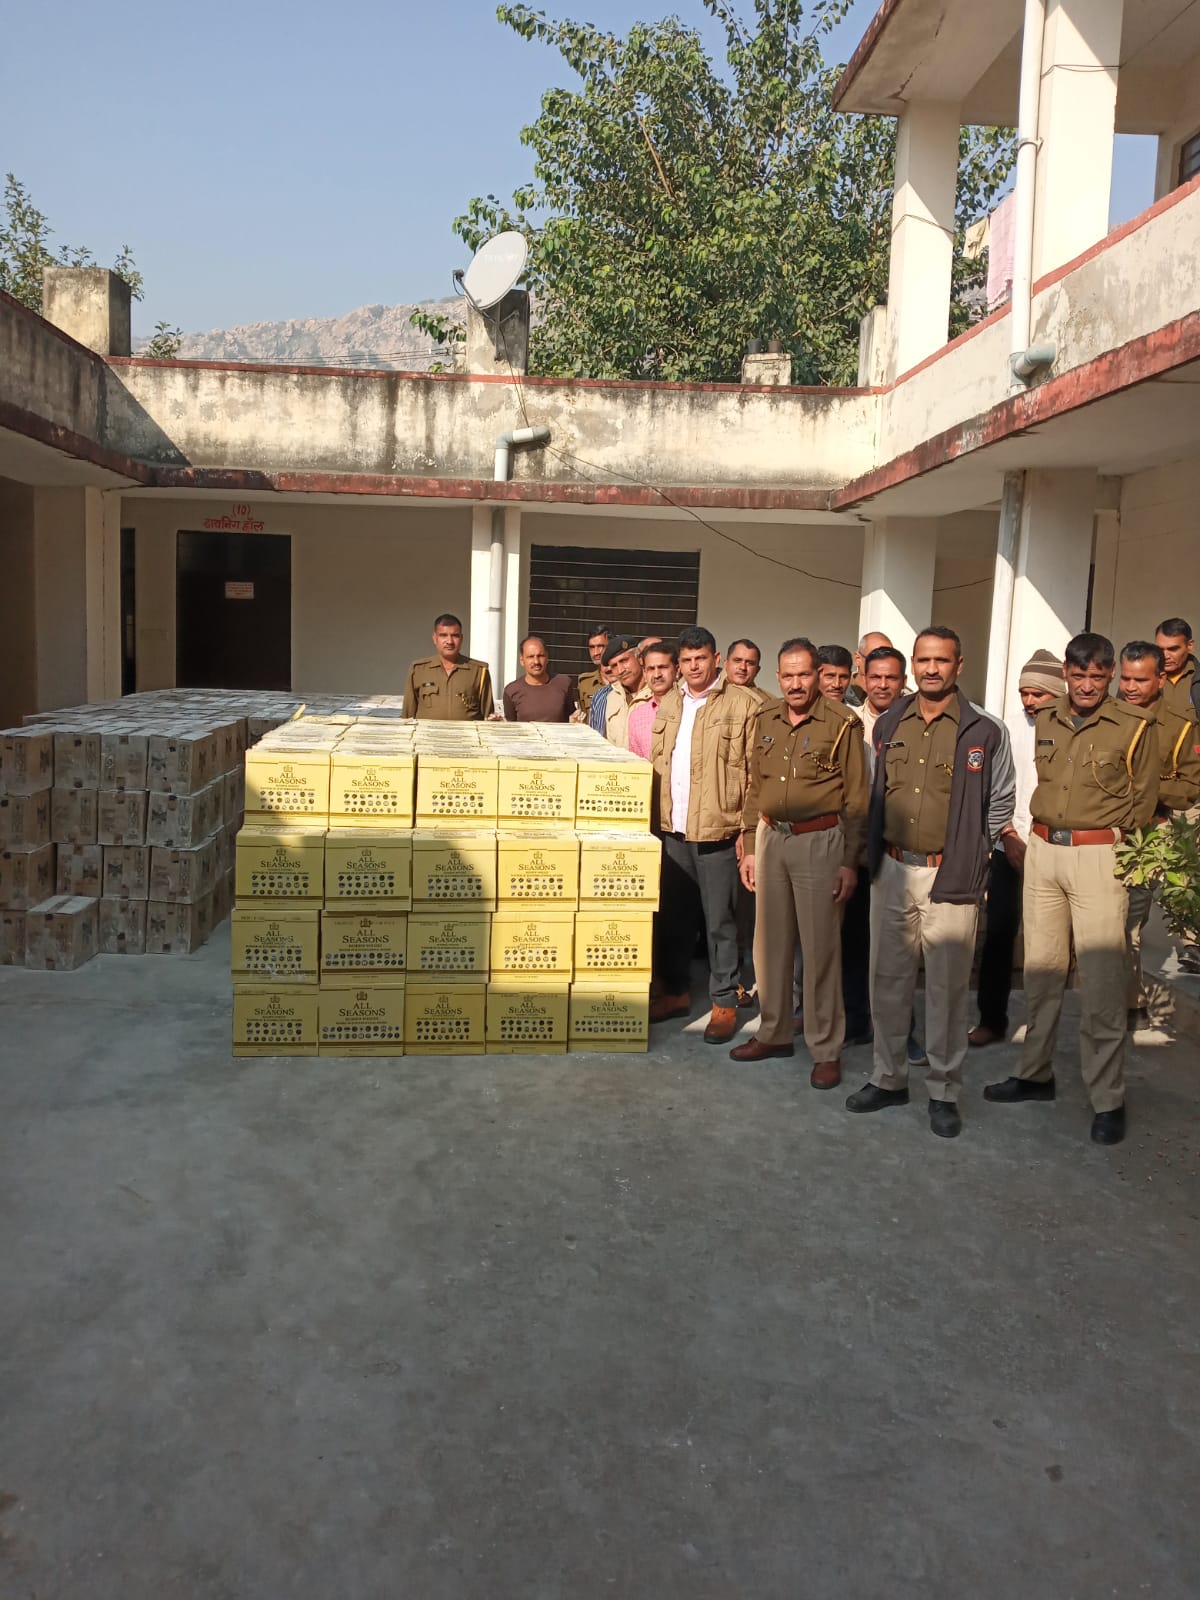 Liquor worth 80 lakhs was being taken from Haryana to Gujarat in a truck hidden in the middle of the wall putty, Alwar Excise Police caught